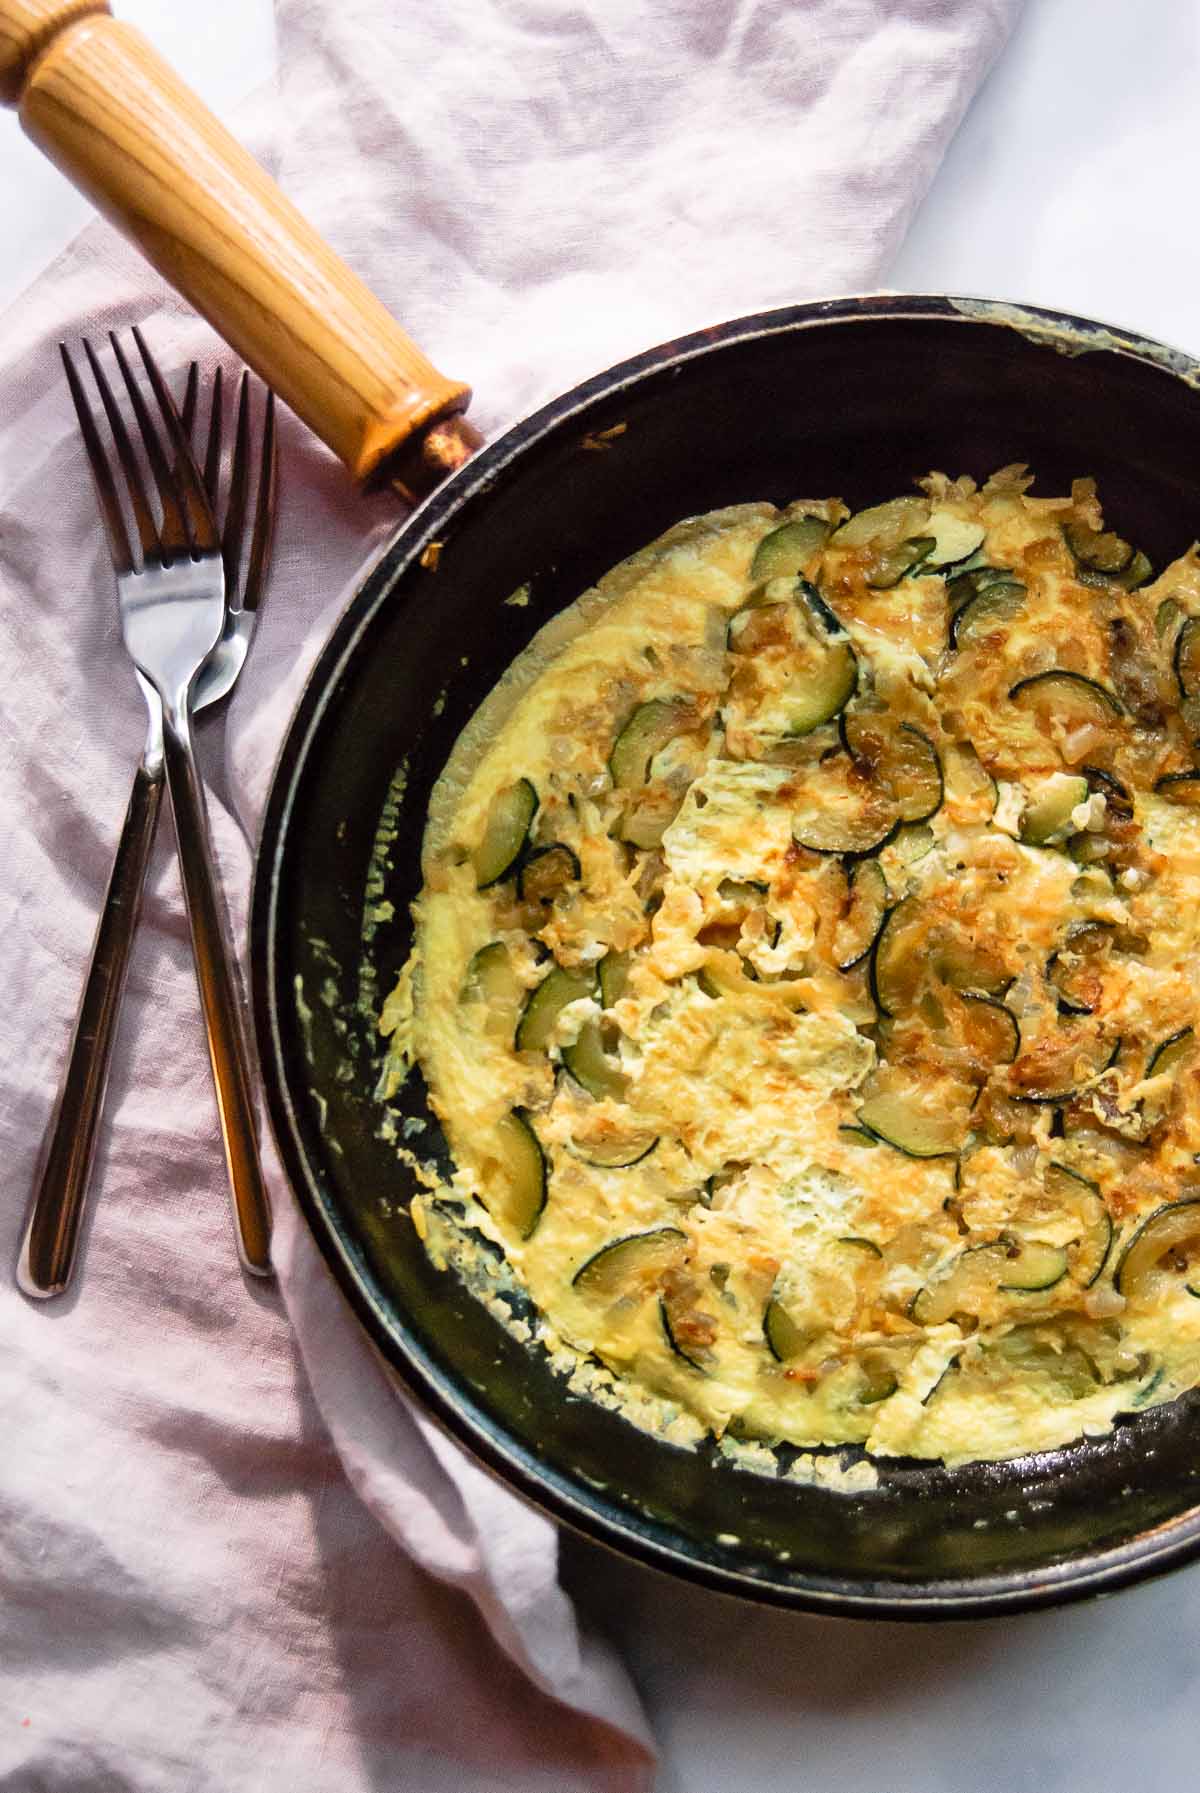 30 Healthy Dinner Recipes for Two - 20-Minute Zucchini Onion Frittata for Two via The Beader Chef | https://www.roseclearfield.com